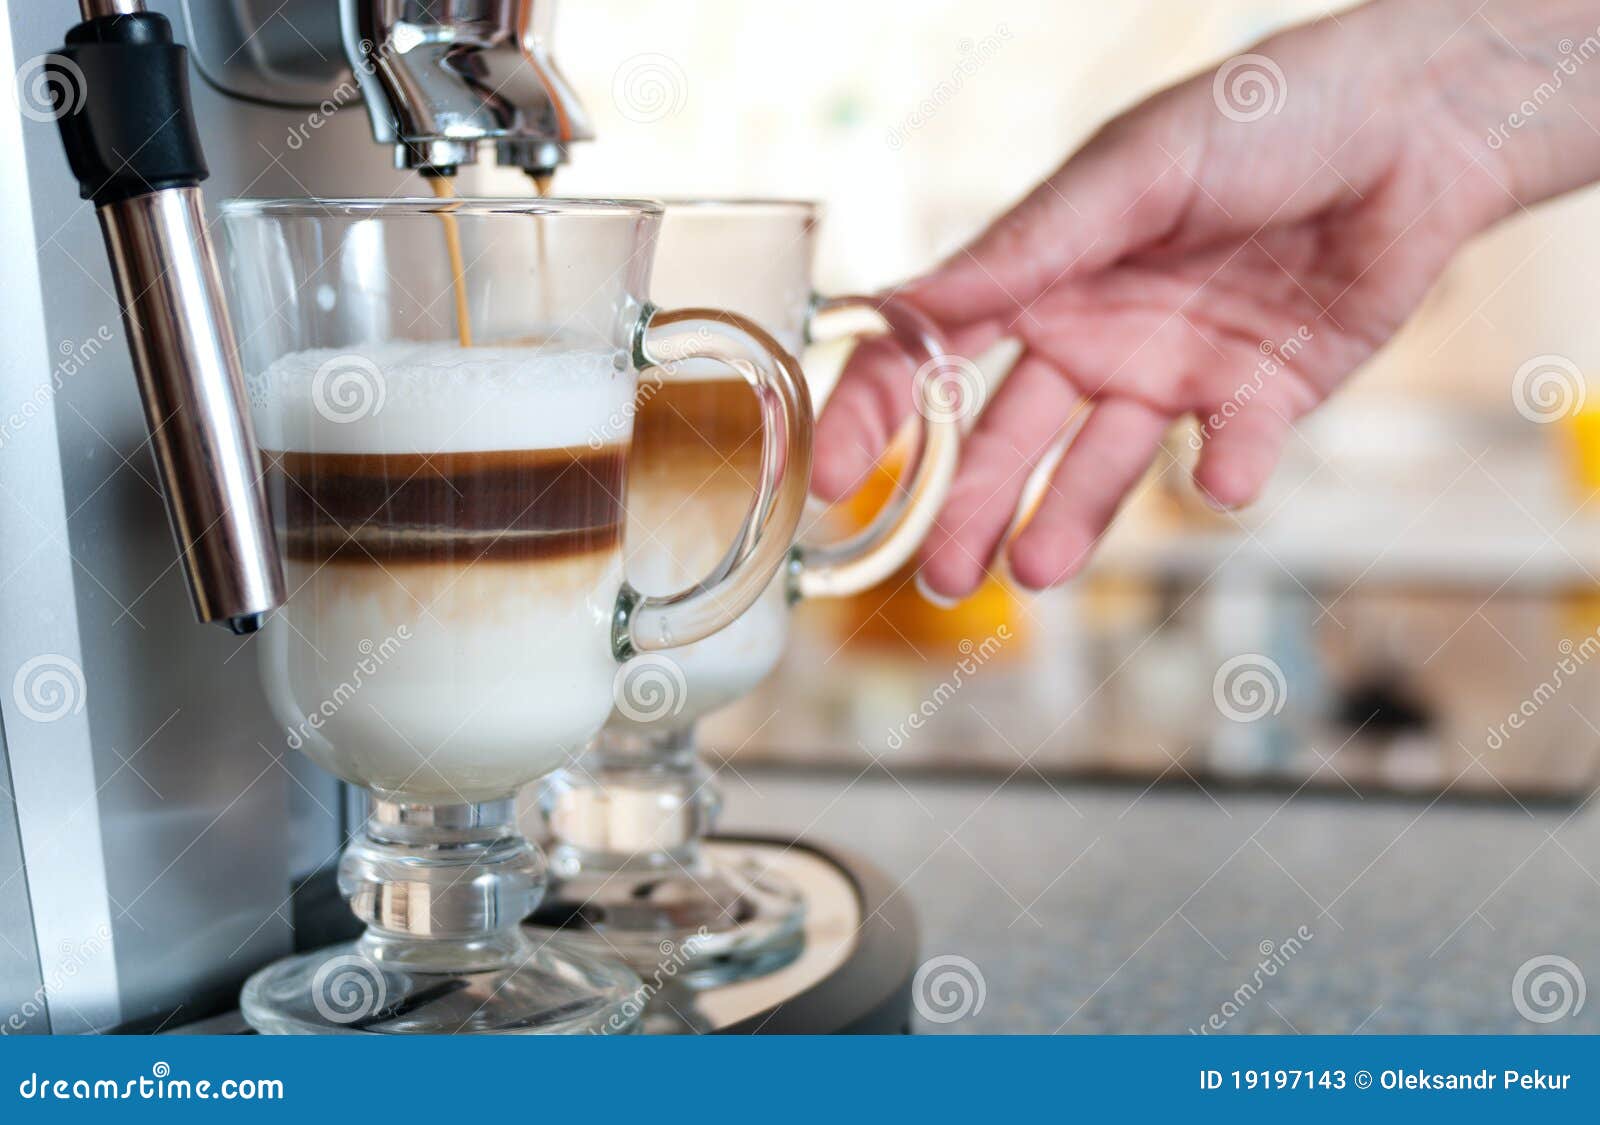 glasses fileed with capuccino